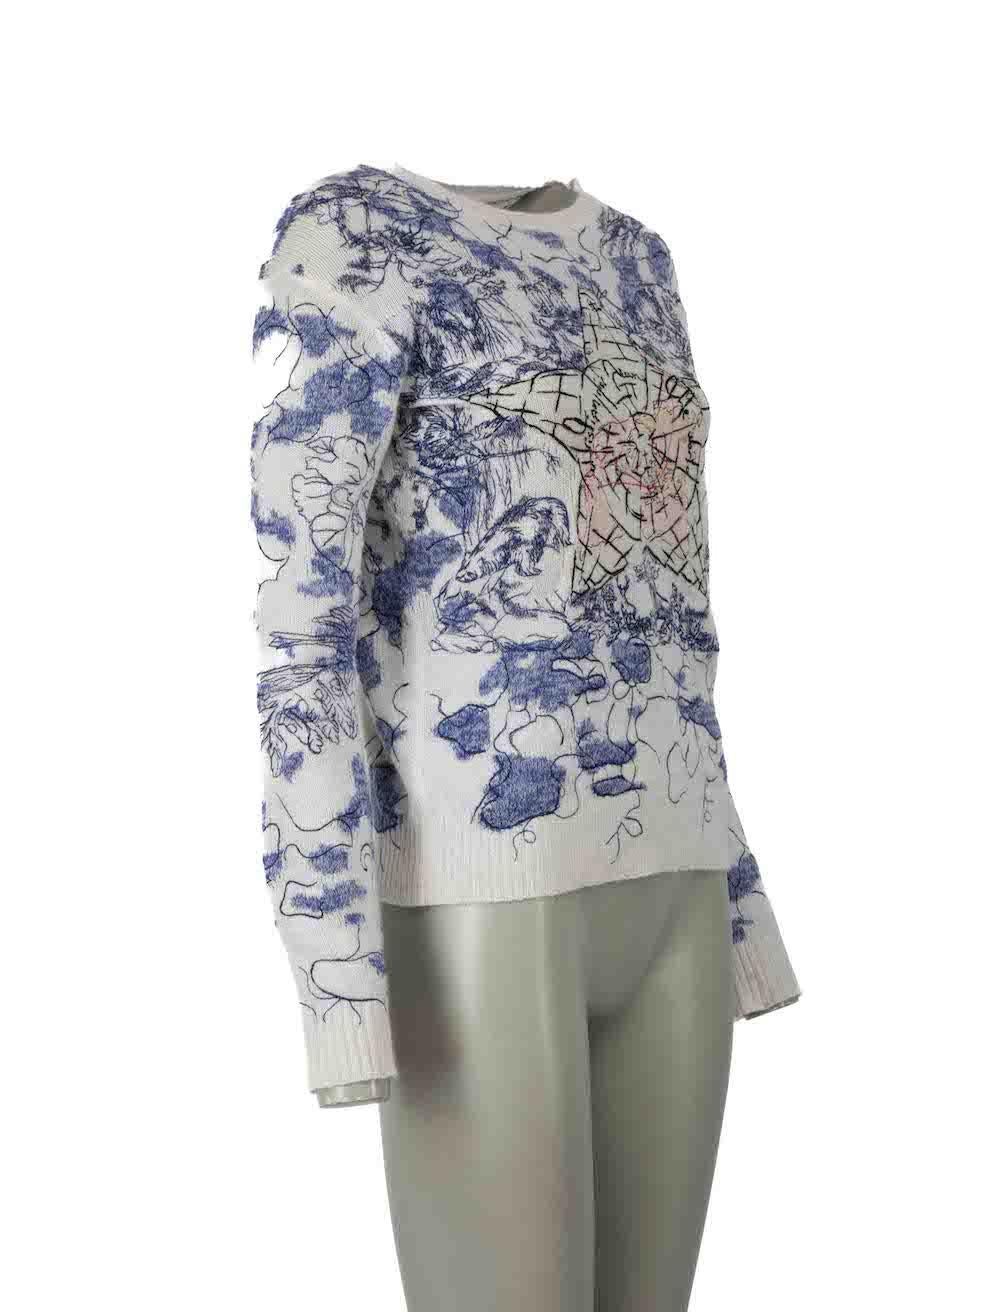 CONDITION is Good. Minor wear to jumper is evident. Light discoloured marks to overall fabric on this used Dior designer resale item.

Details
Toile De Jouy
Blue
Cashmere
Jumper
Round neck
Embroidered pattern

Made in Italy 

Composition
100%